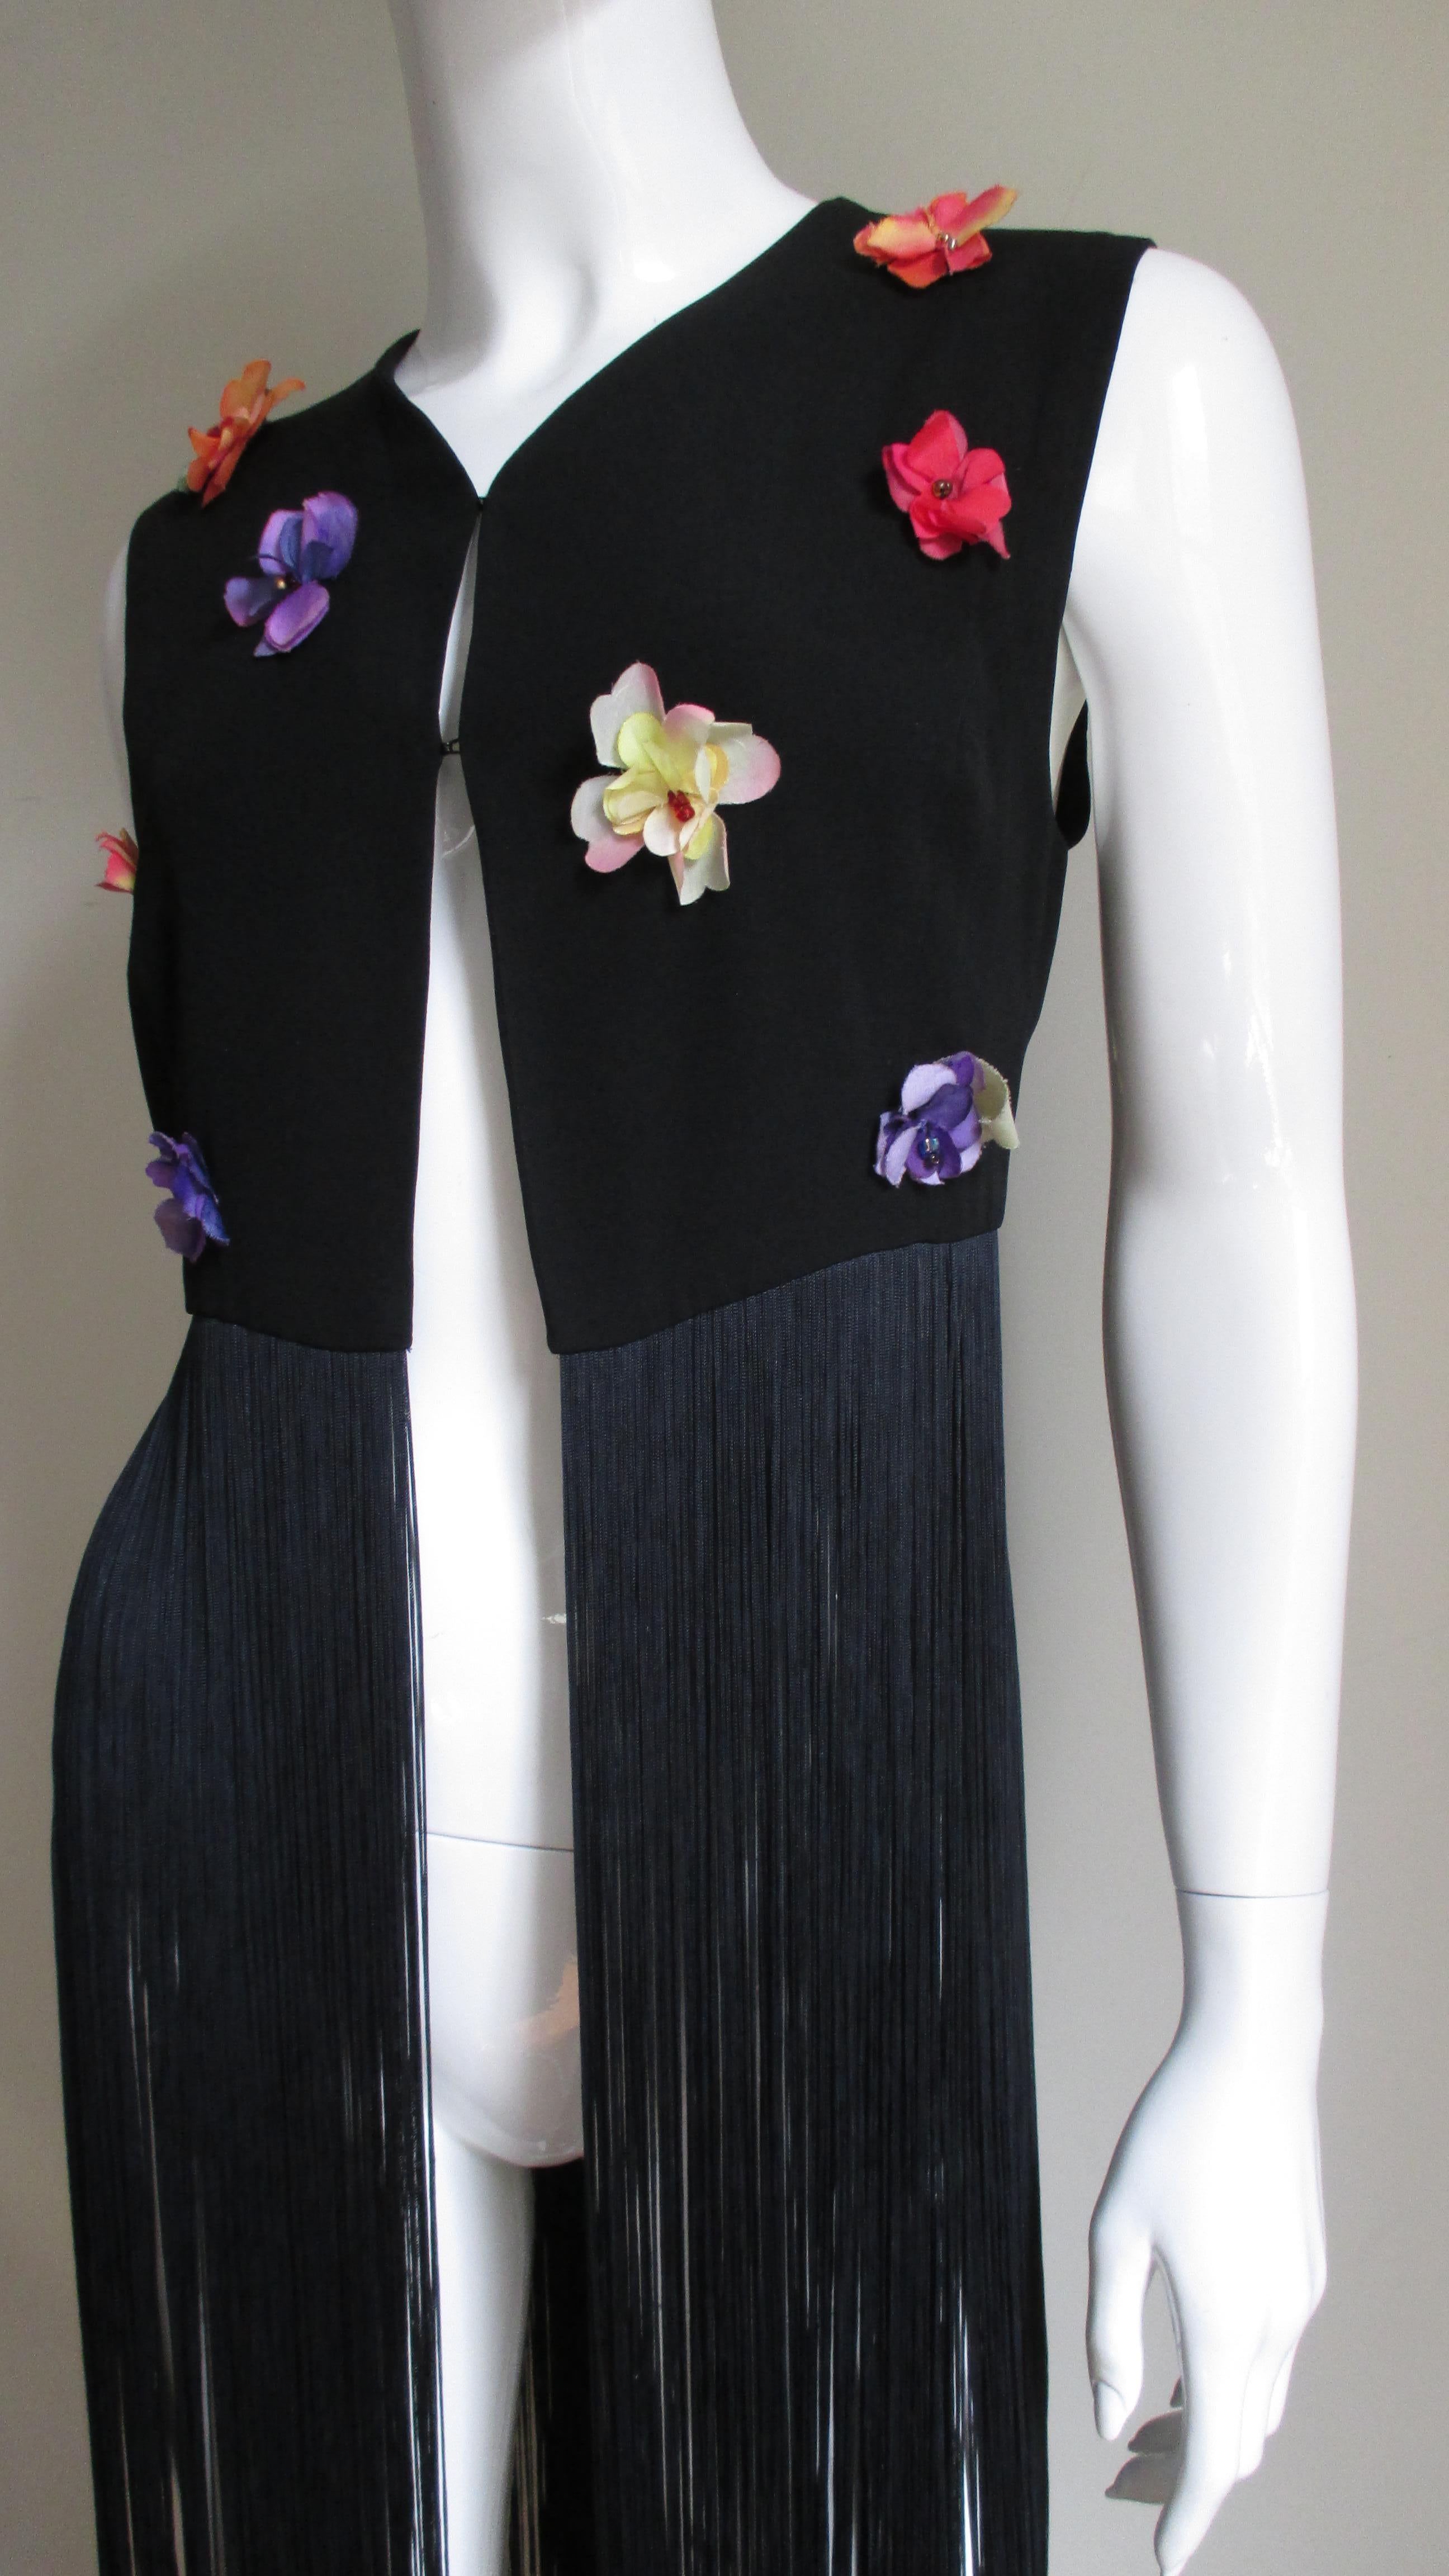  Dolce & Gabbana Flower Applique Pants and Fringe Trim Top  In Good Condition For Sale In Water Mill, NY